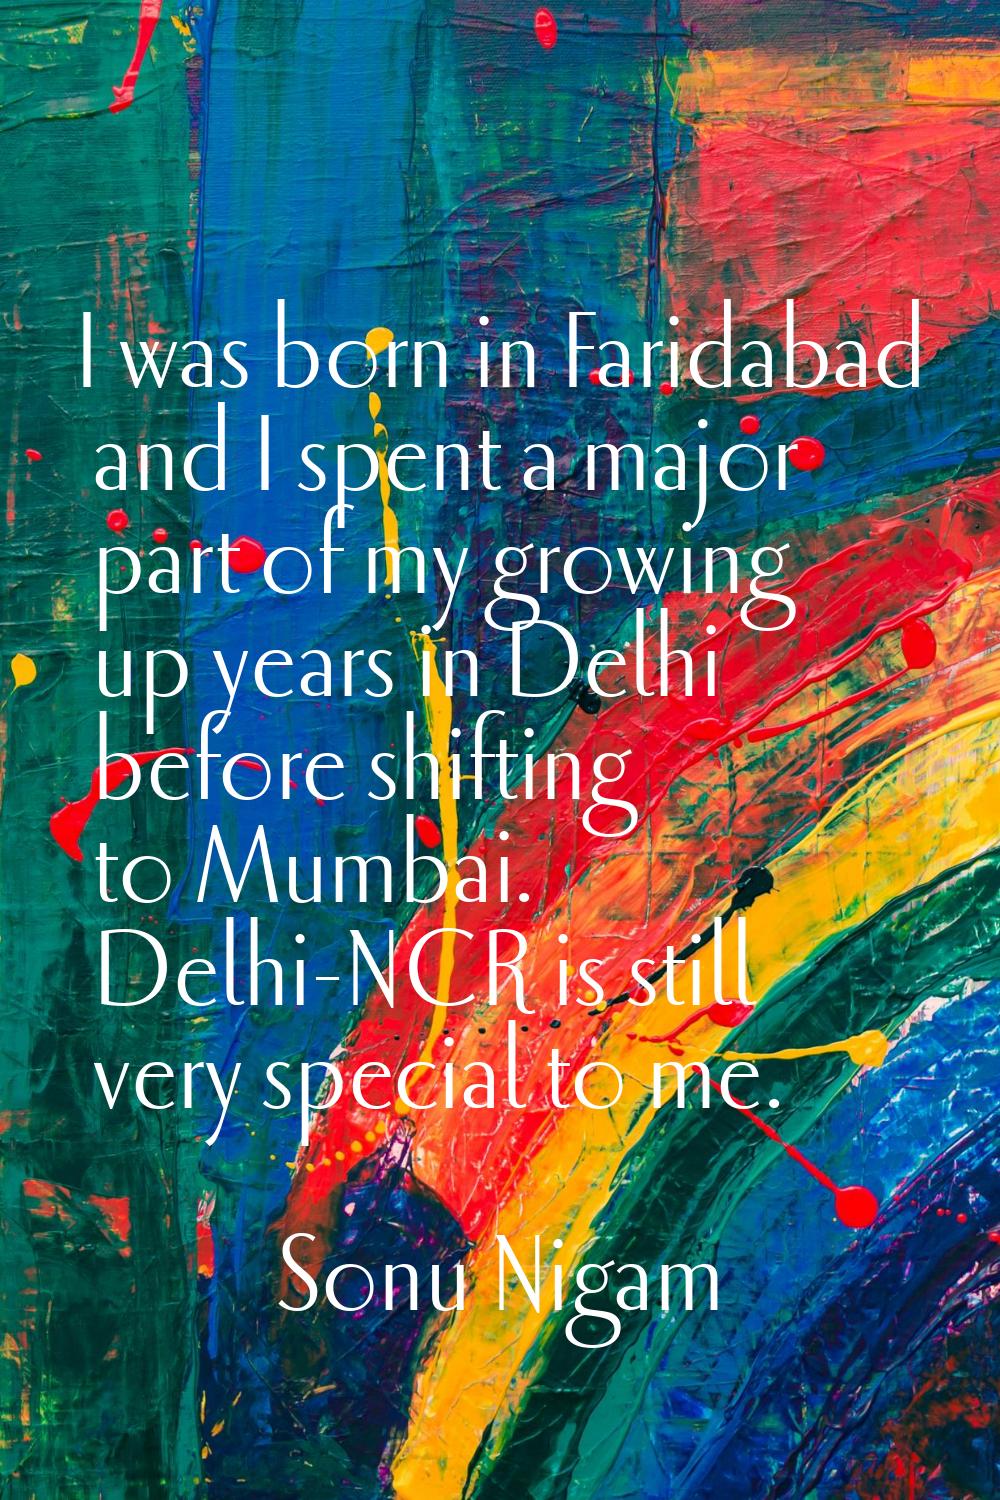 I was born in Faridabad and I spent a major part of my growing up years in Delhi before shifting to